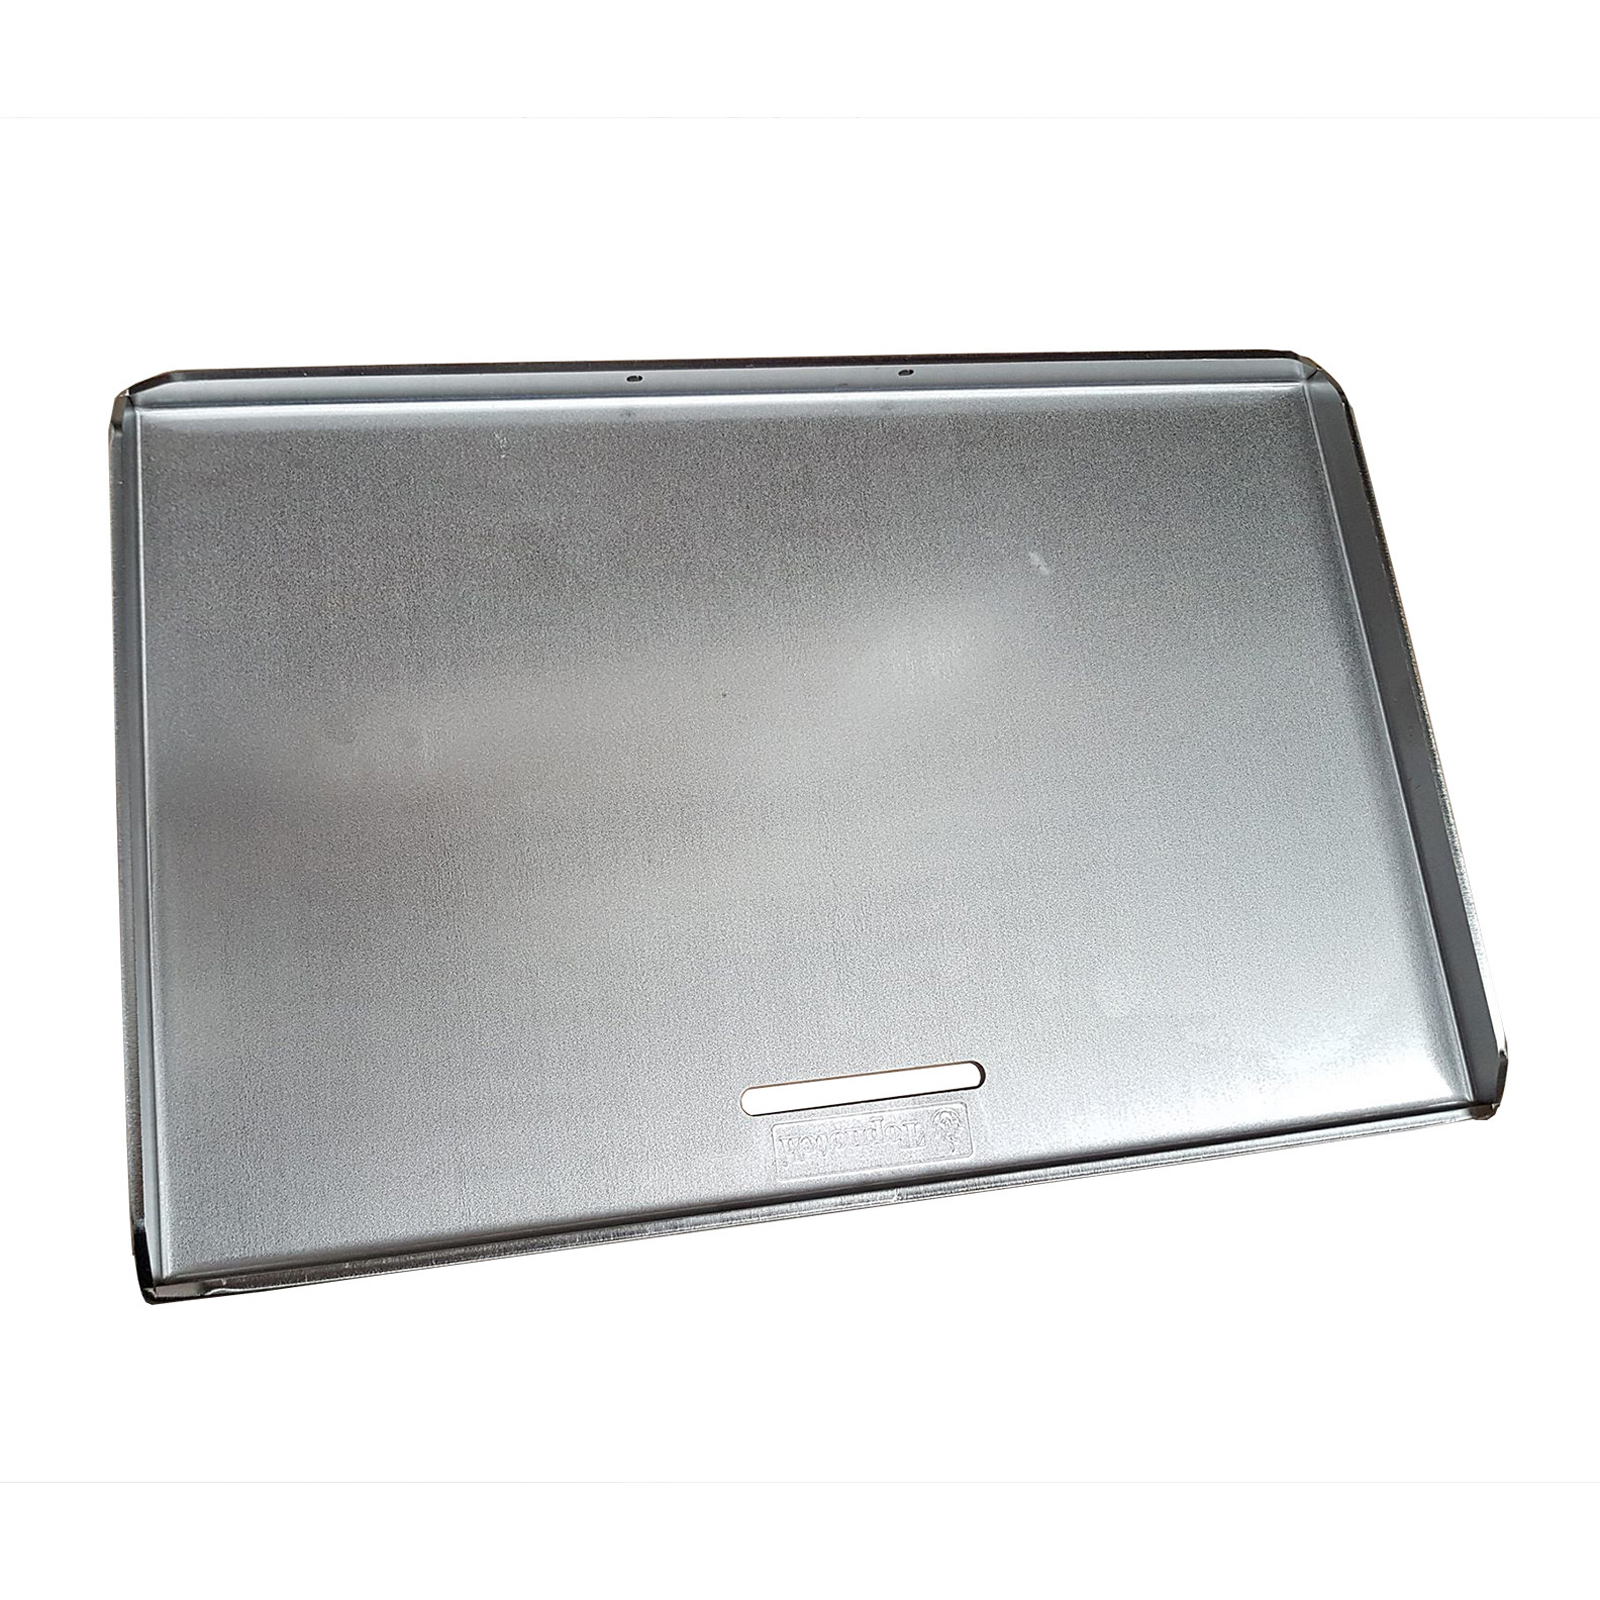 Topnotch Stainless Steel Hot Plate 317x485mm - PSS317X485